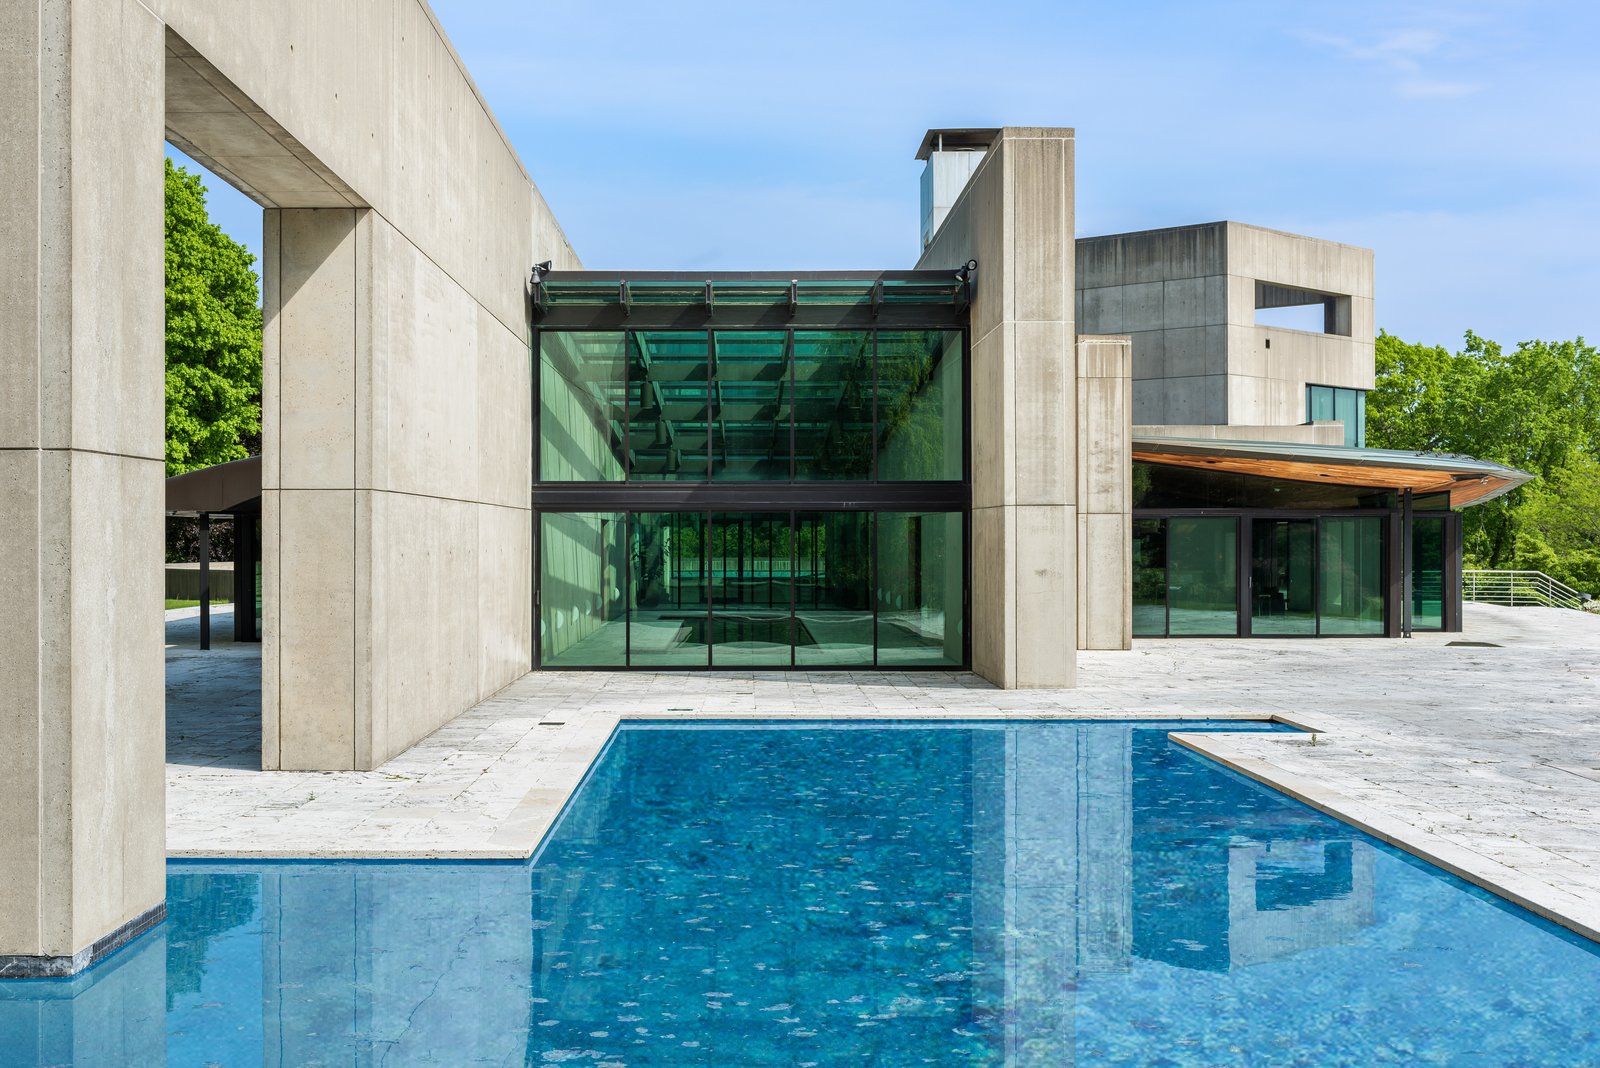 There are two heated swimming pools: inside and out. The present owner completely refurbished both pools and updated the glass which covers the perimeter, helping to bring the home to "even better than original" condition. 